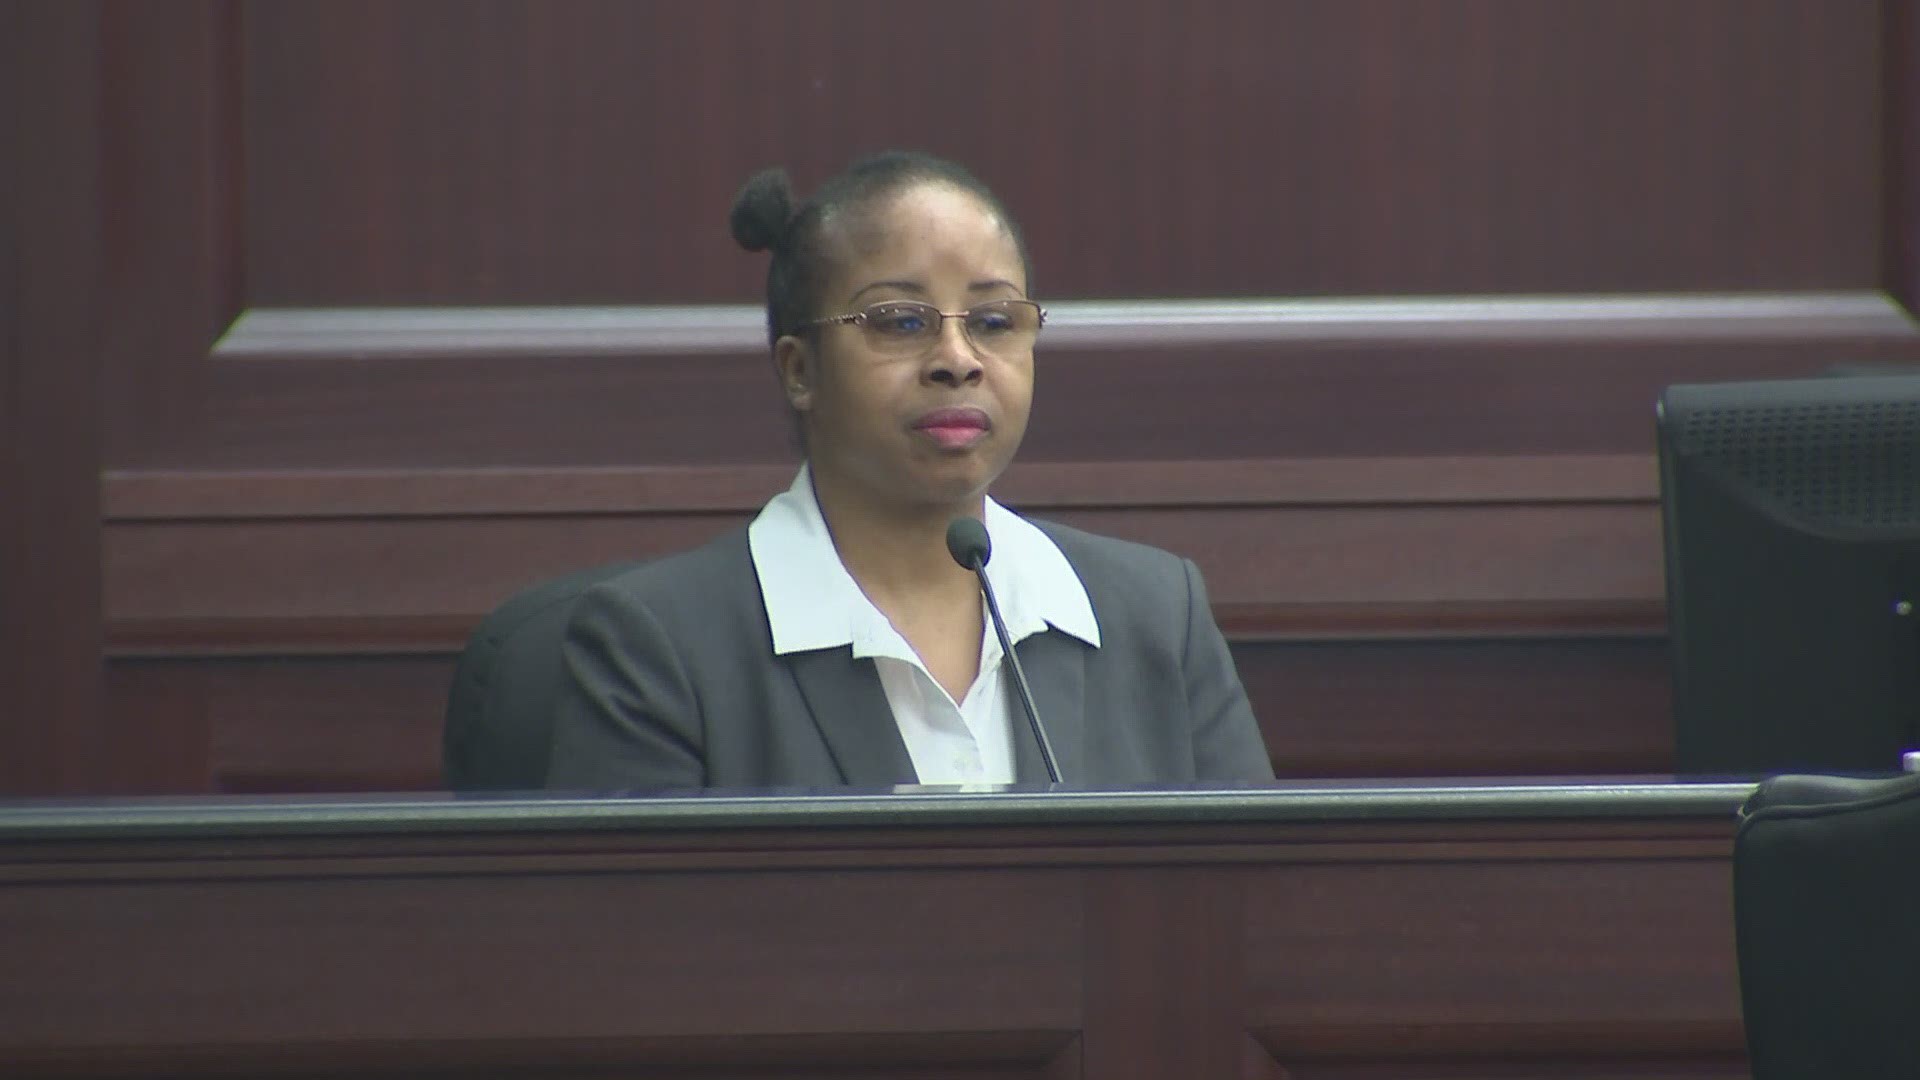 During her sentencing hearing on Friday, the attorney asked Gloria Williams about her trip to Jacksonville 19 years ago. Williams said her reason for coming here was "definitely not to take a baby."